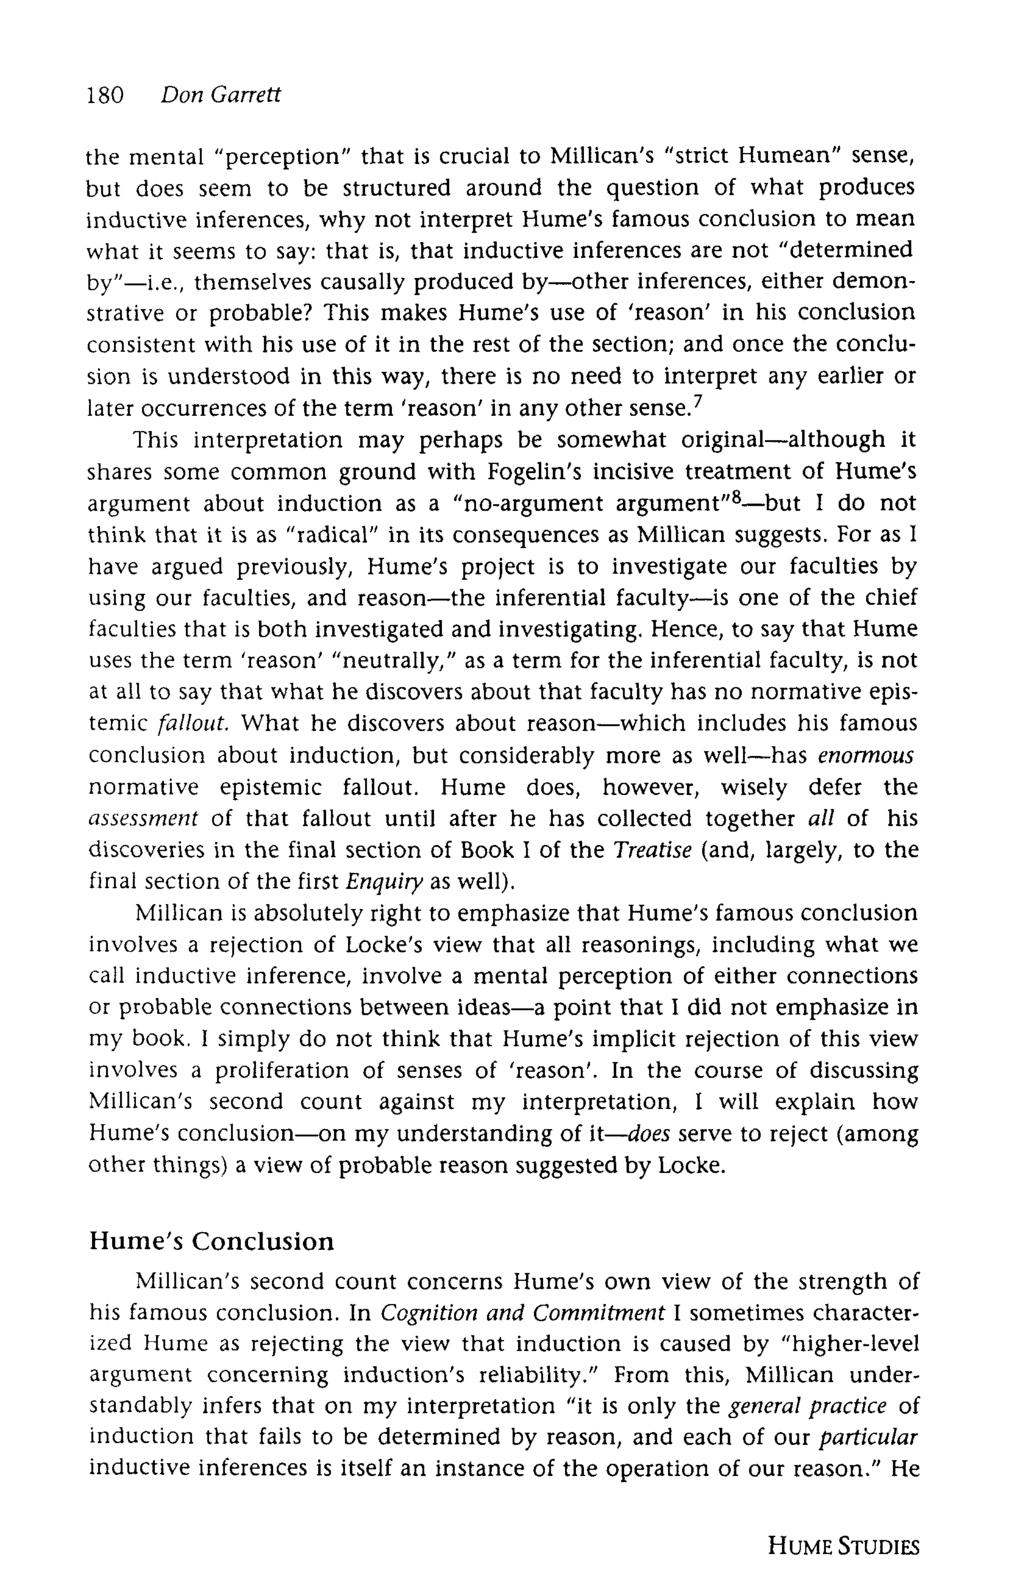 180 Don Garrett the mental perception that is crucial to Millican s strict Humean sense, but does seem to be structured around the question of what produces inductive inferences, why not interpret